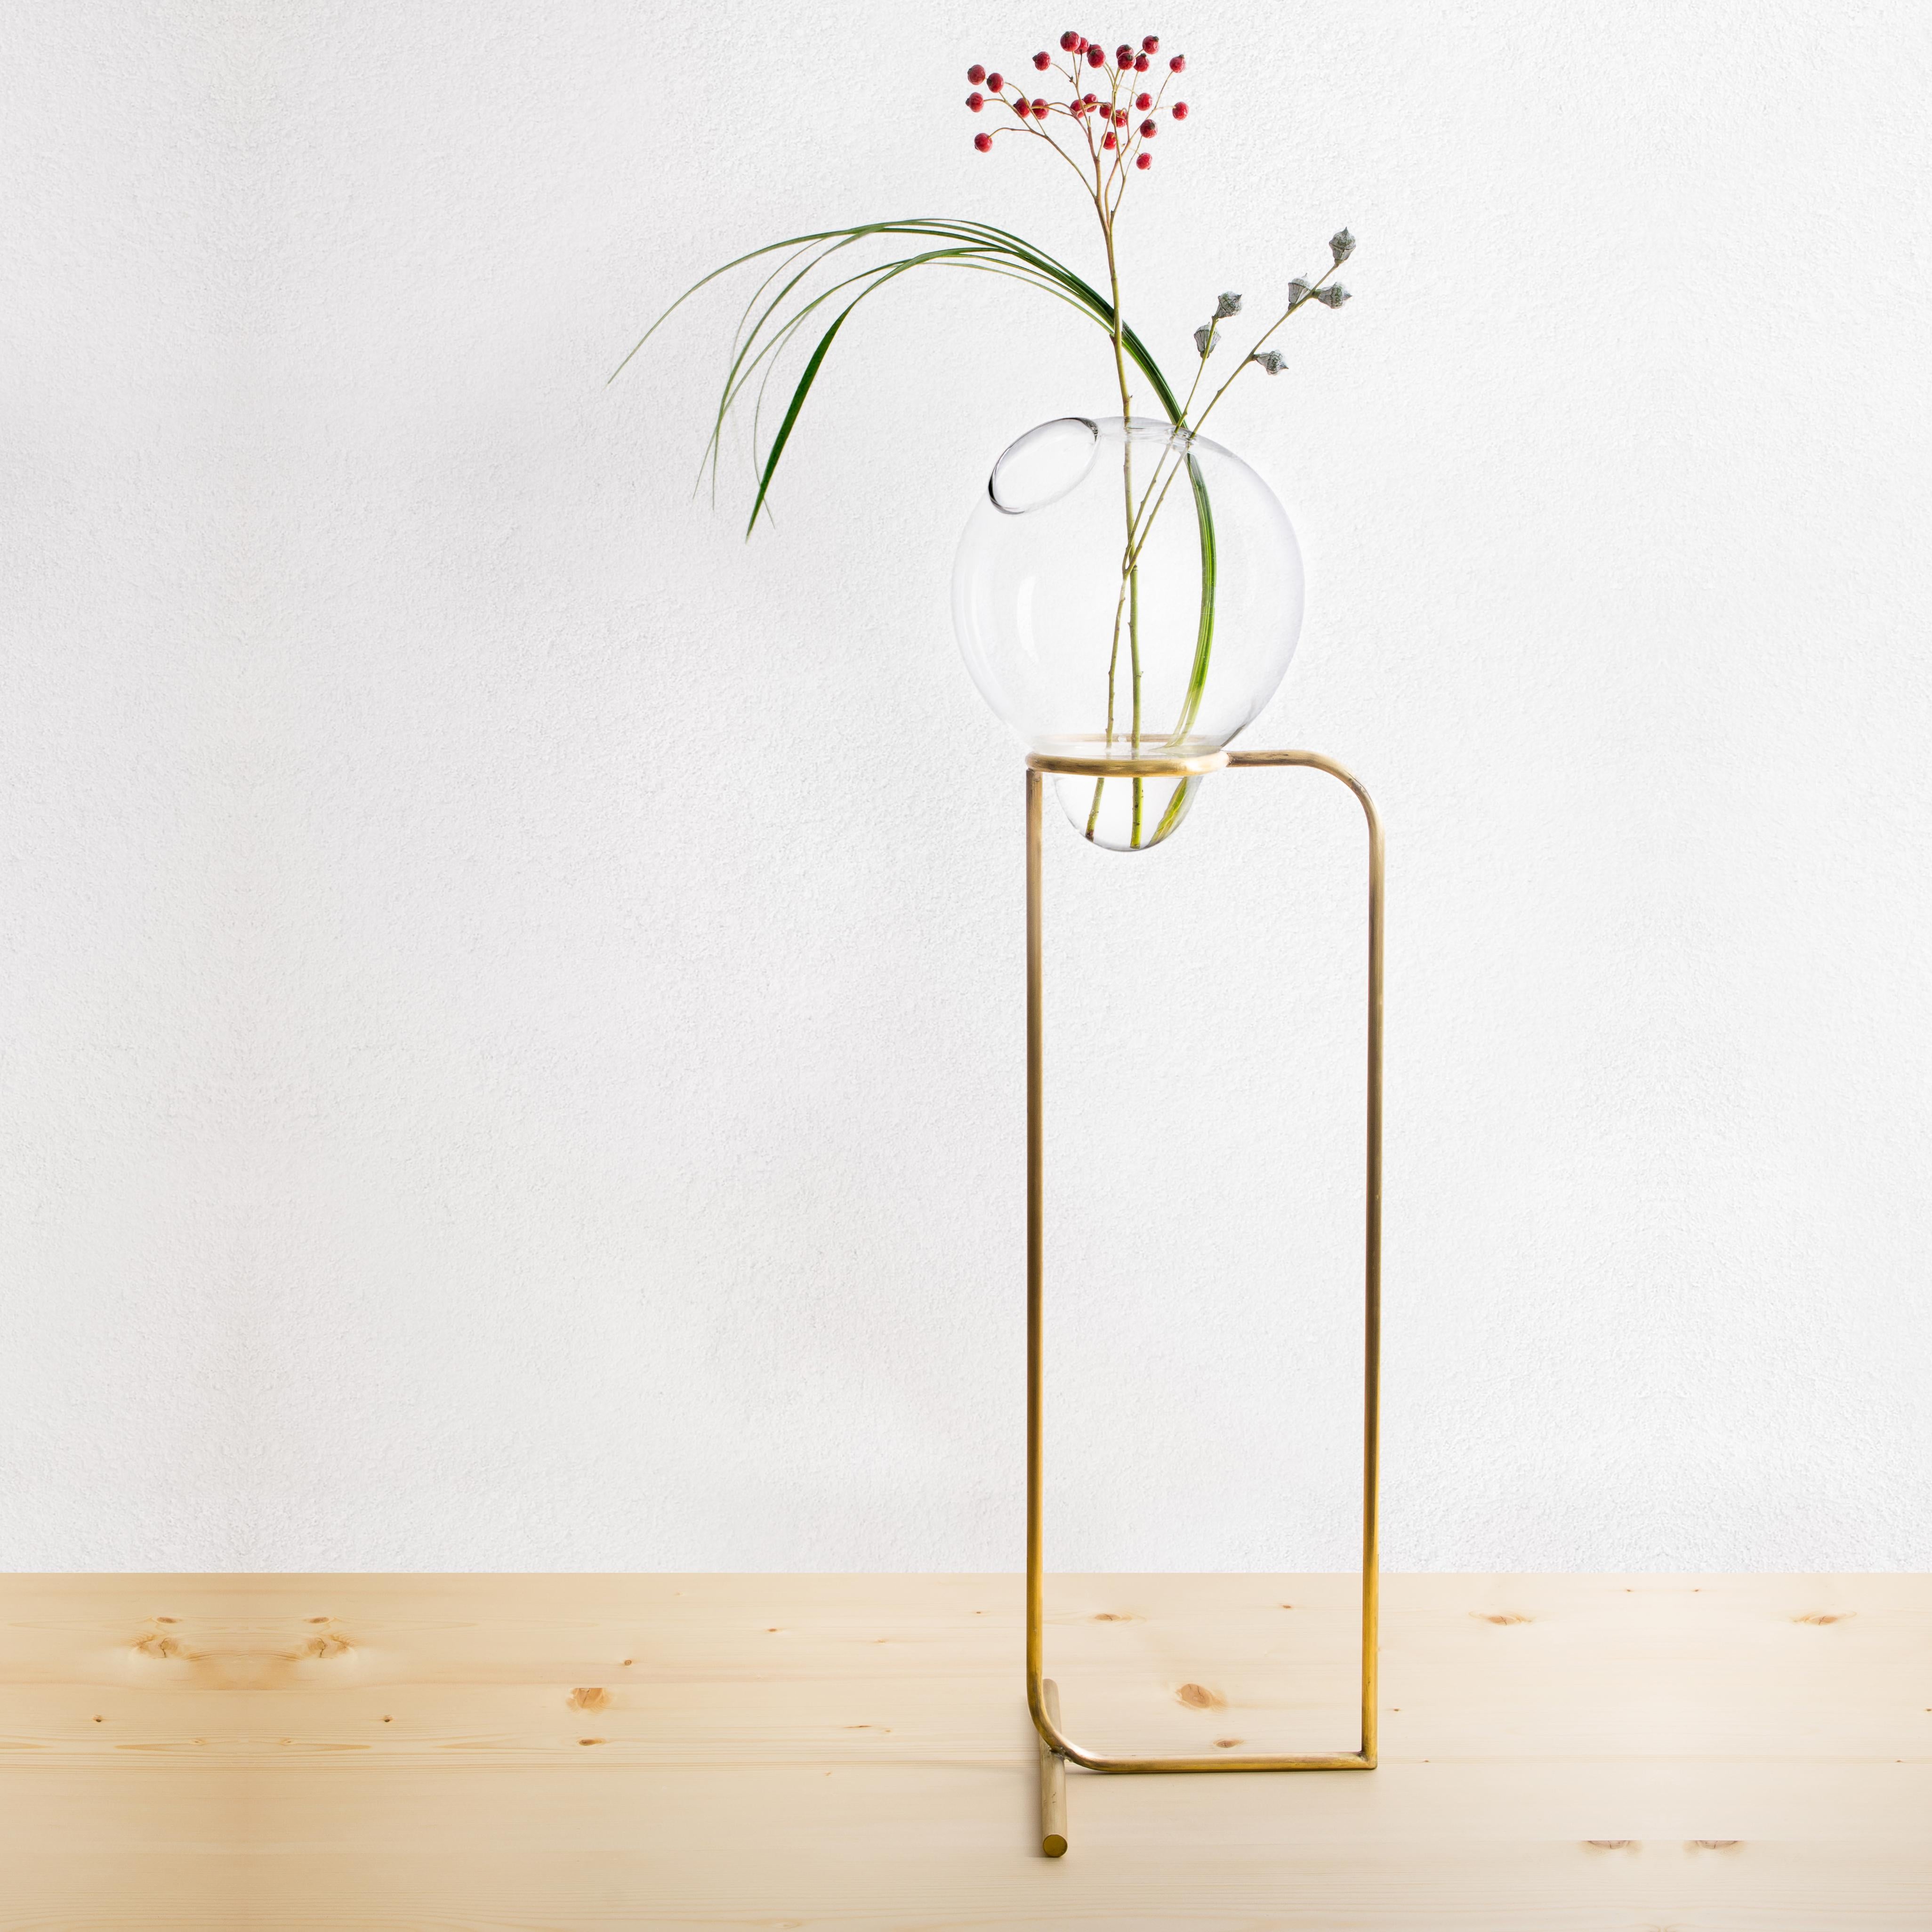 Dimensions: L25 x W25 x H100 cm
The “Fugu” vase is part of the project Ikebana for beginners, it is the translation of a concept that wants to confuse the limits of the function of a product with the emotional freedom generated by the user’s